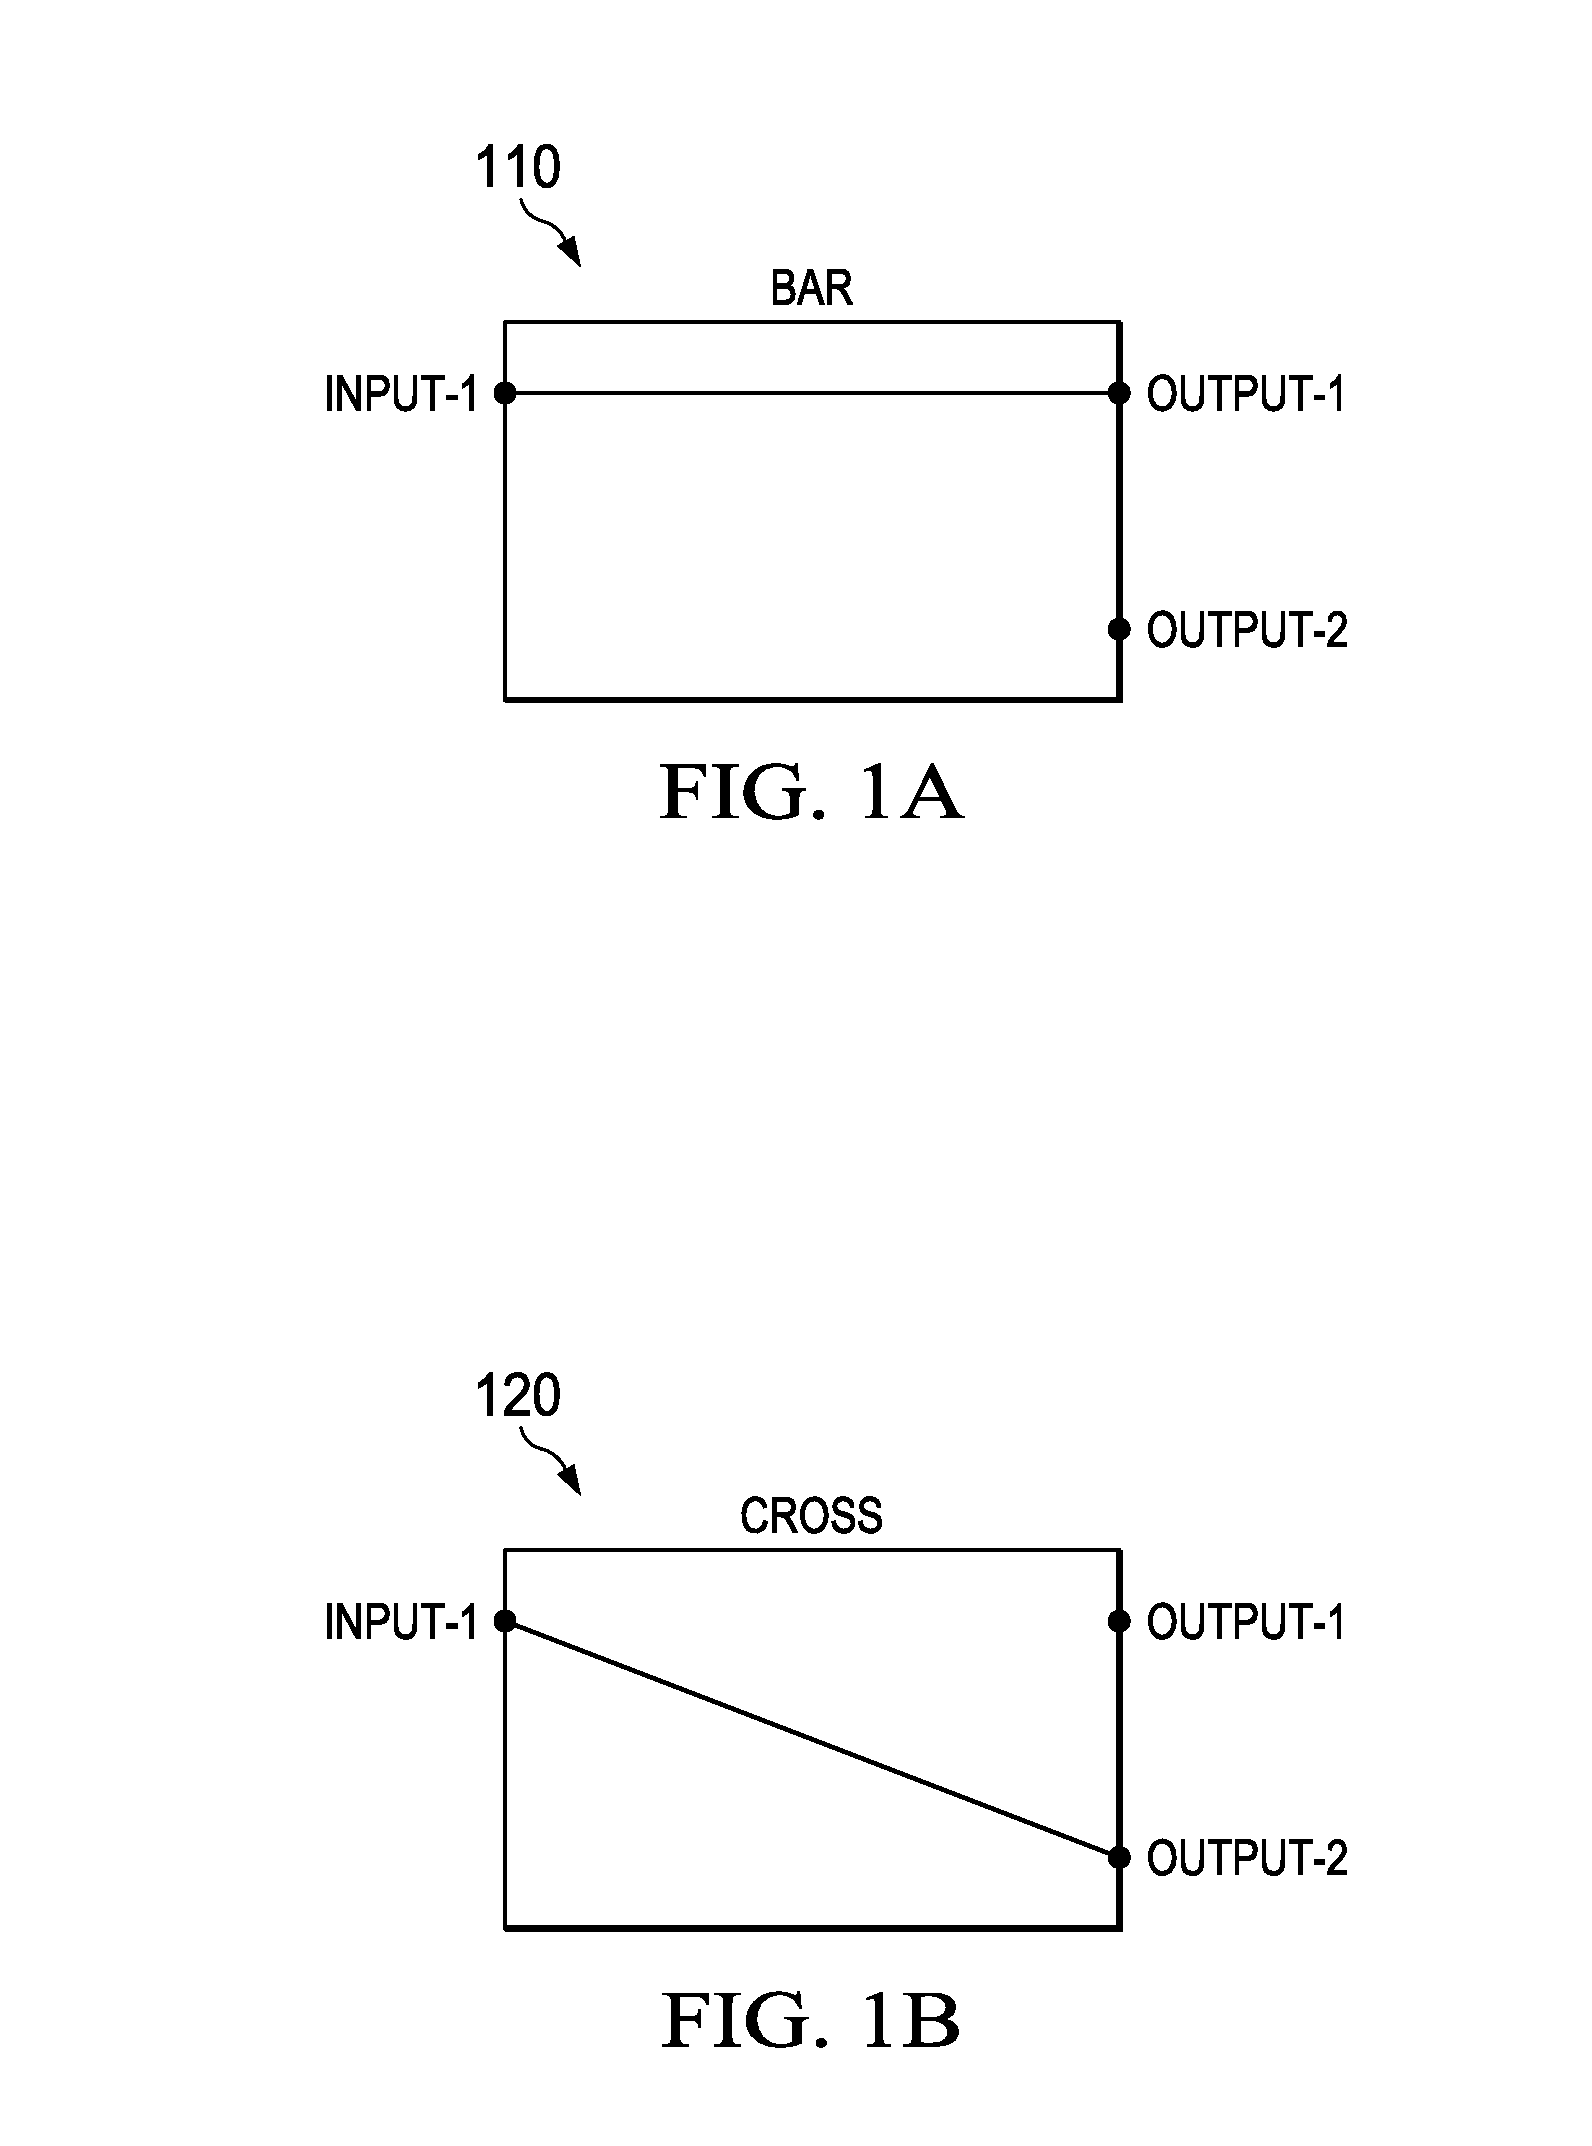 Method for Crosstalk and Power Optimization in Silicon Photonic Based Switch Matrices